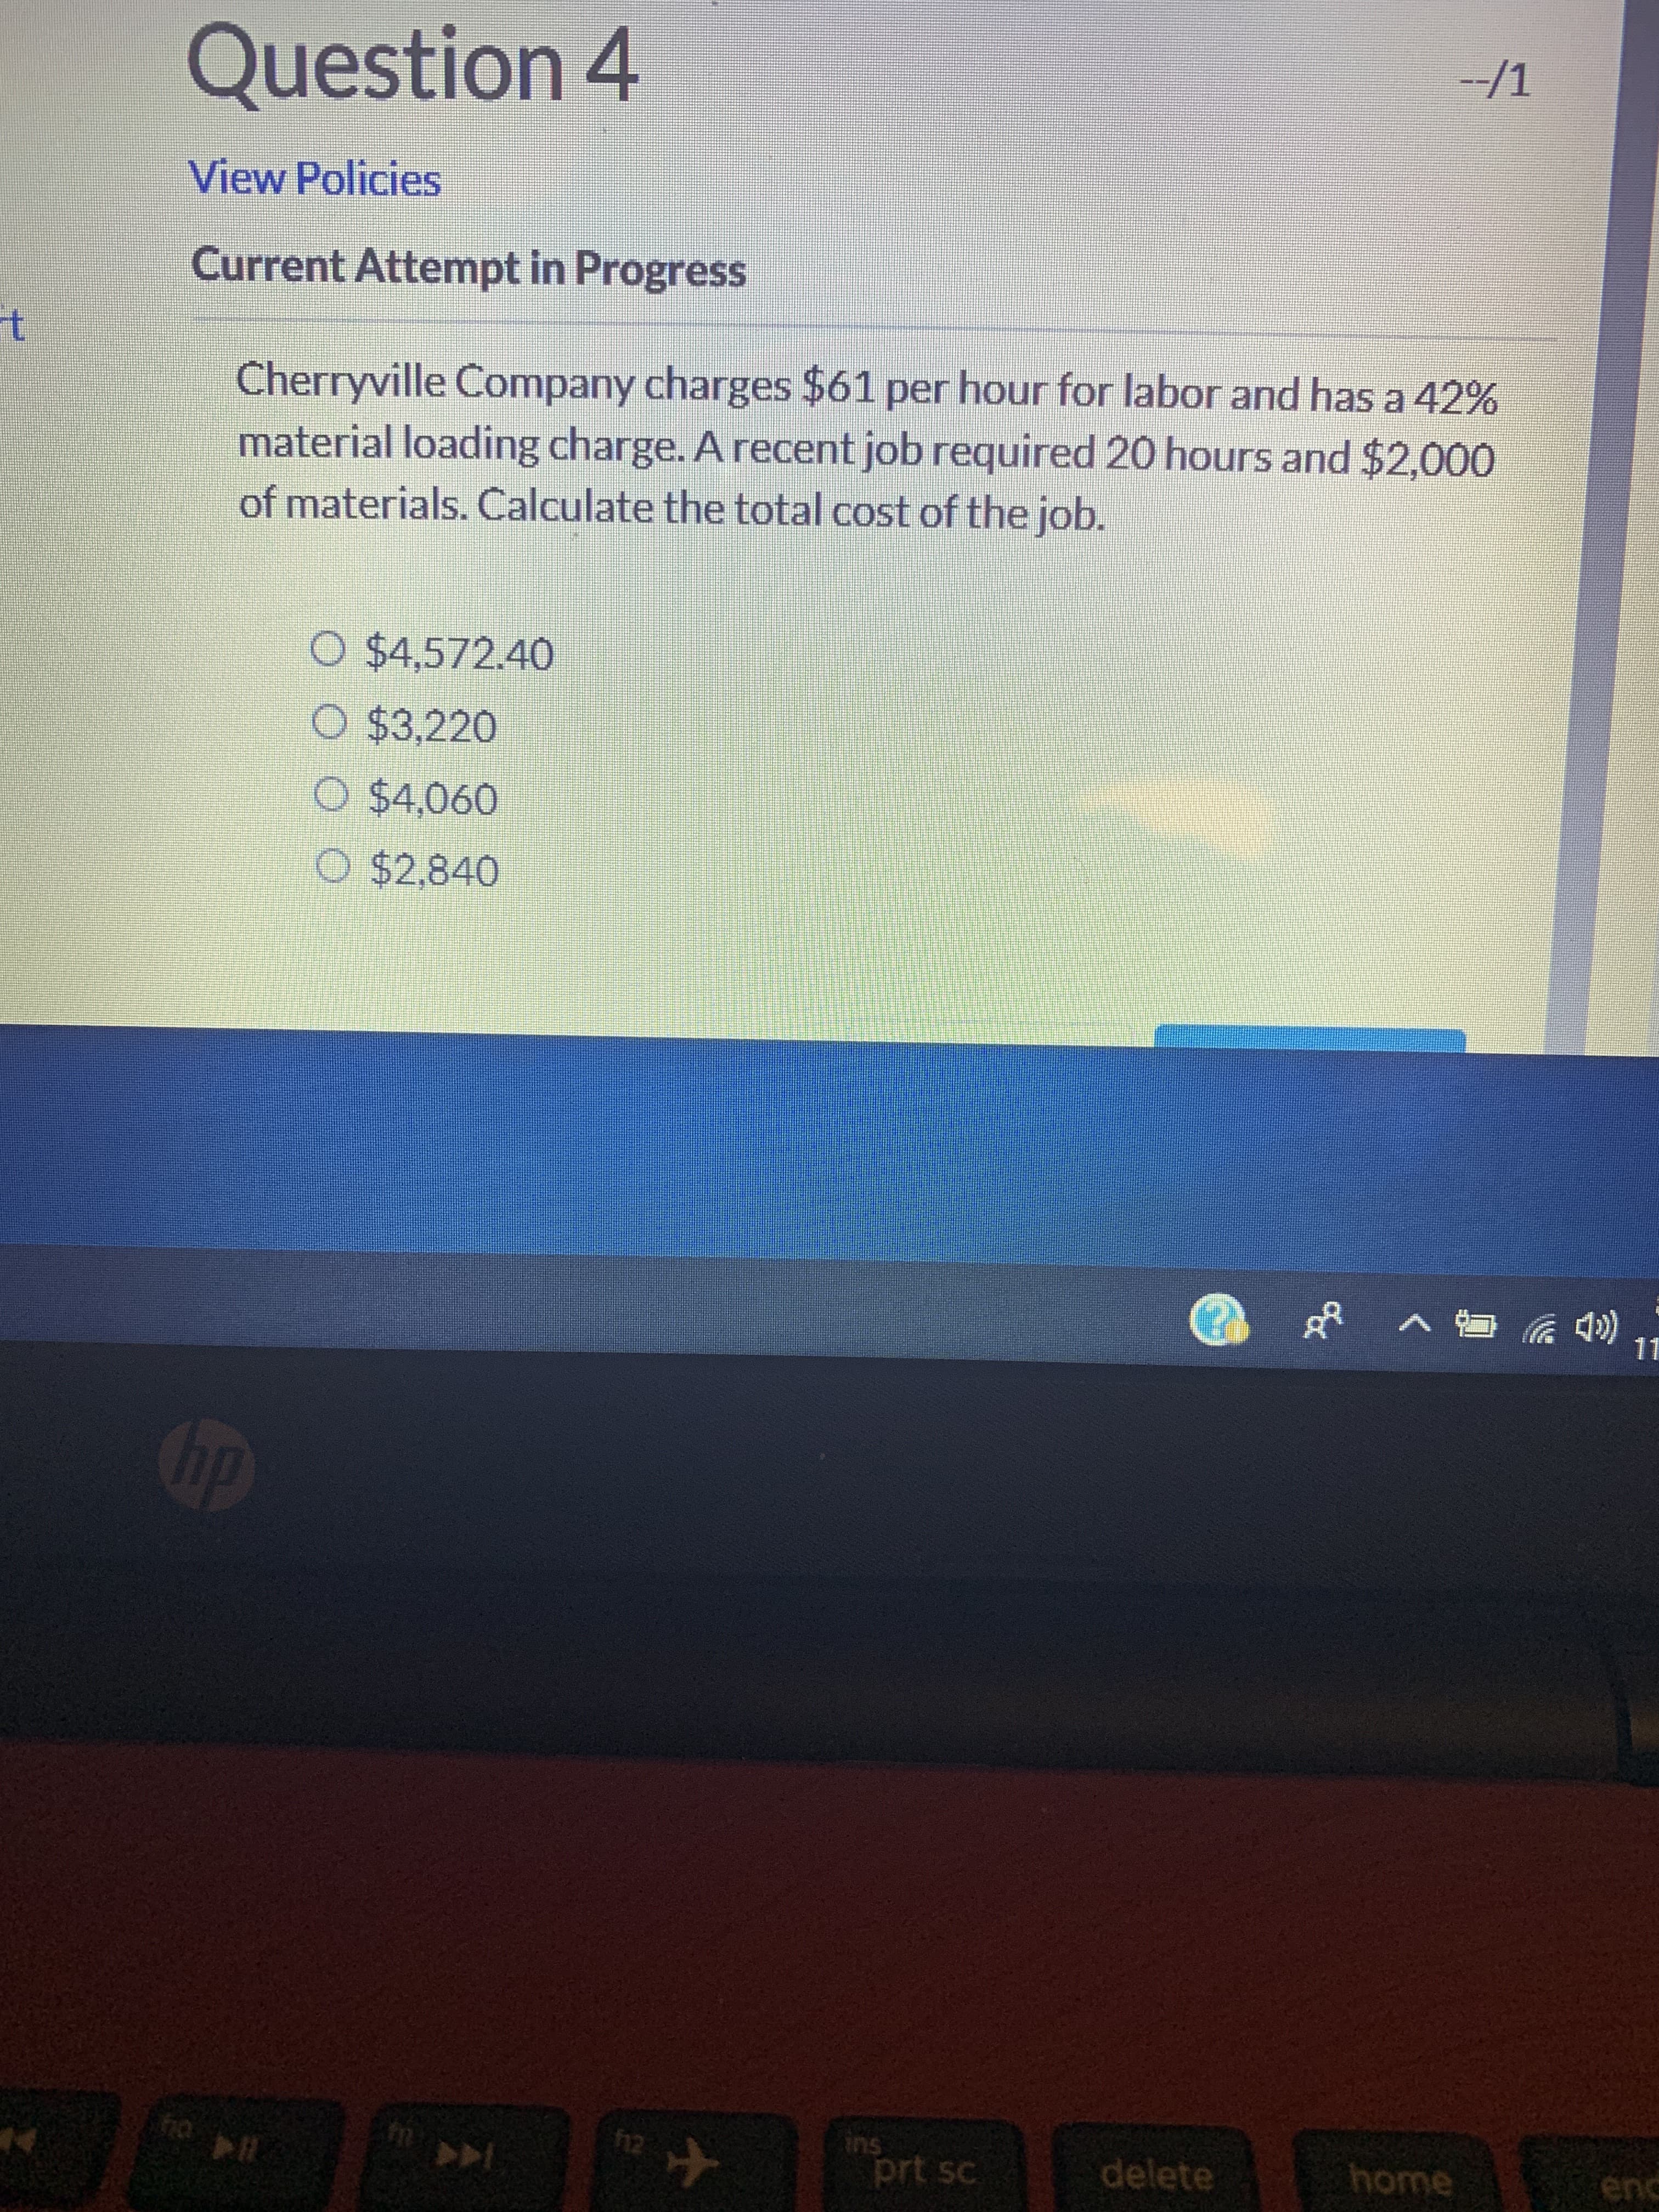 Question 4
-/1
View Policies
Current Attempt in Progress
t
Cherryville Company charges $61 per hour for labor and has a 42%
material loading charge. A recent job required 20 hours and $2,000
of materials. Calculate the total cost of the job.
O $4,572.40
O $3,220
O $4,060
O $2,840
4)
11
hp
ins
prt sc
n0
12
delete
home
enc
